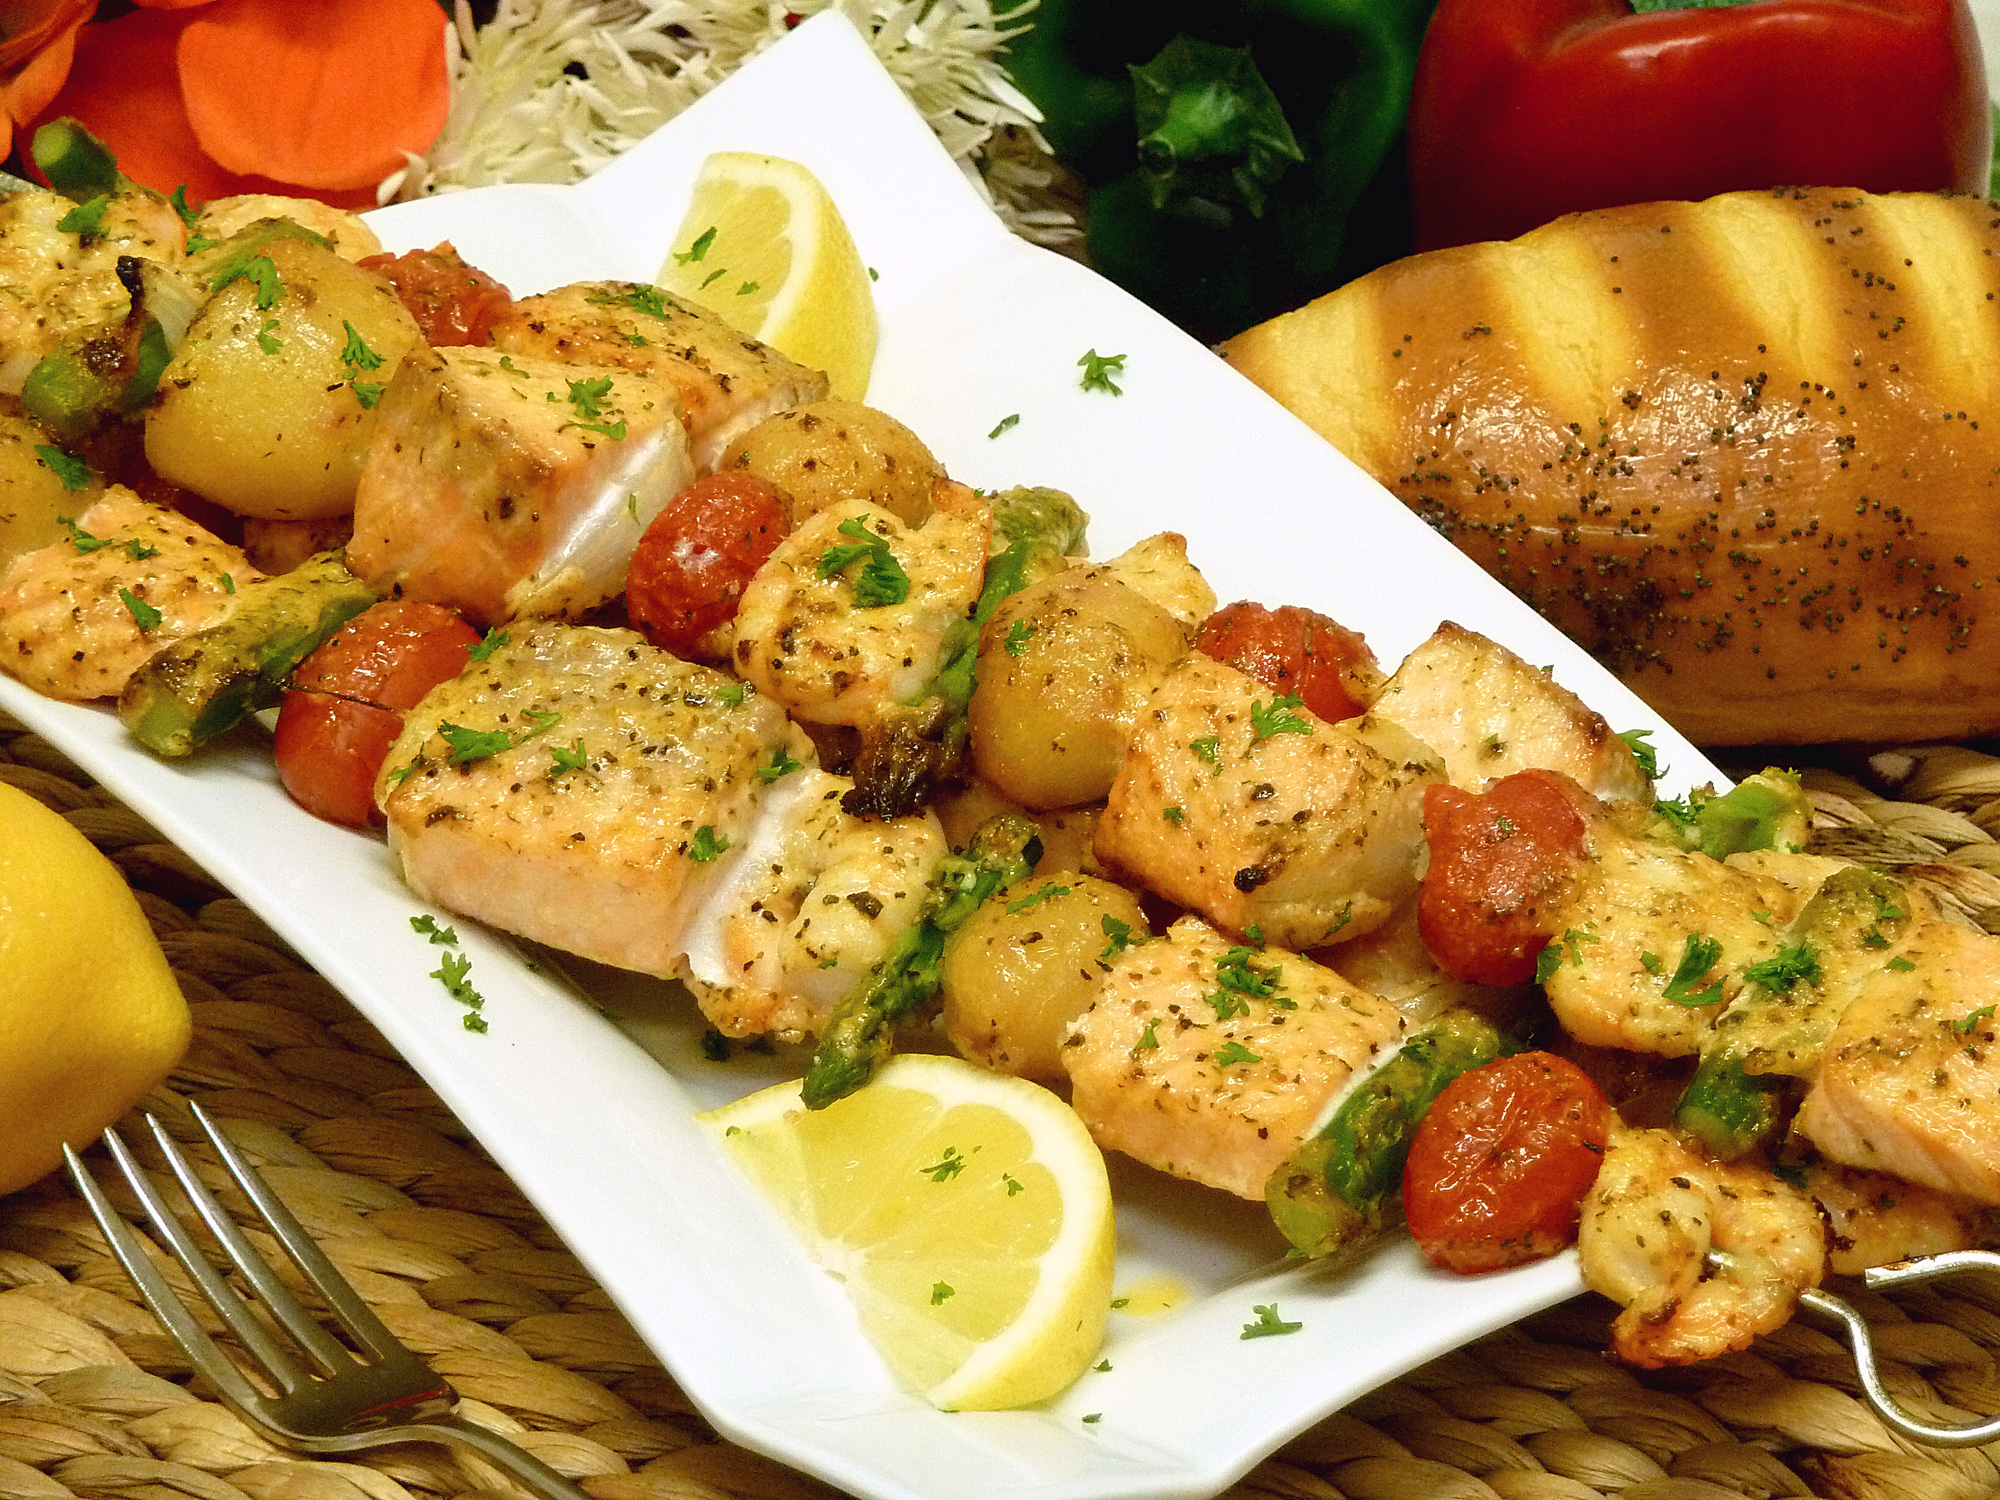 A delightfully different basting sauce makes salmon kebabs extra-special.